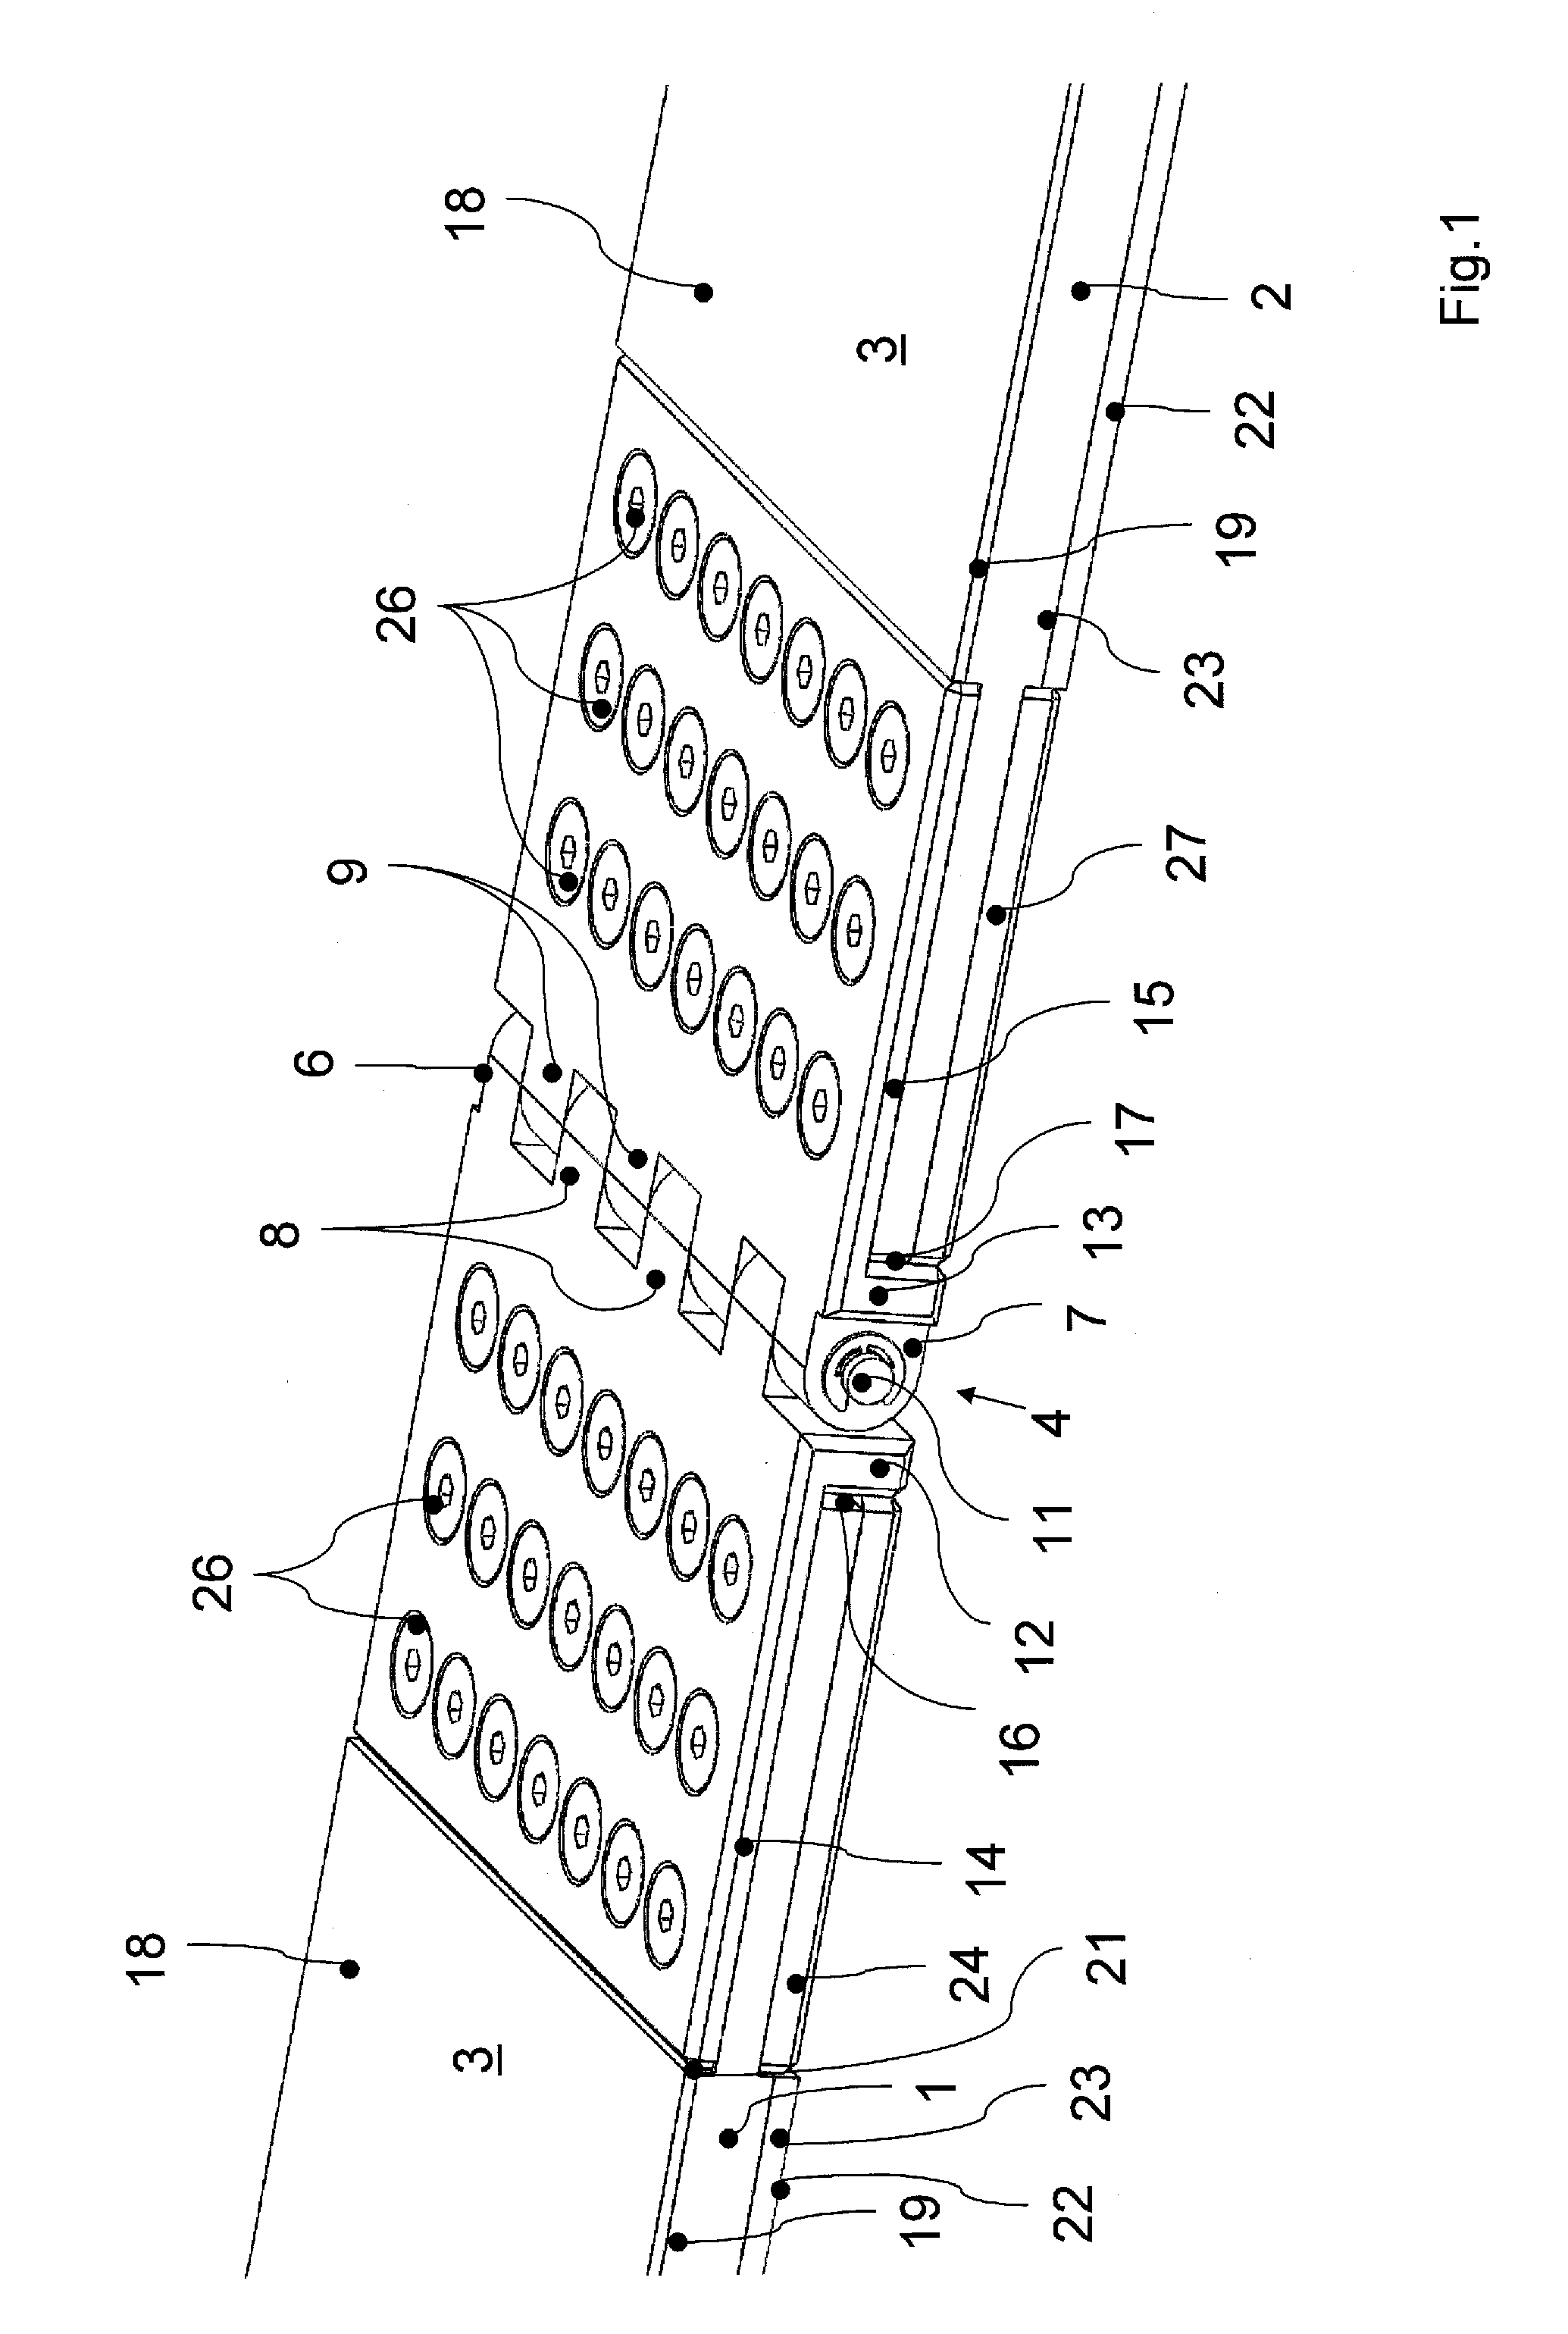 Steel cord conveyer belt with a connecting hinge for coupling two belt ends